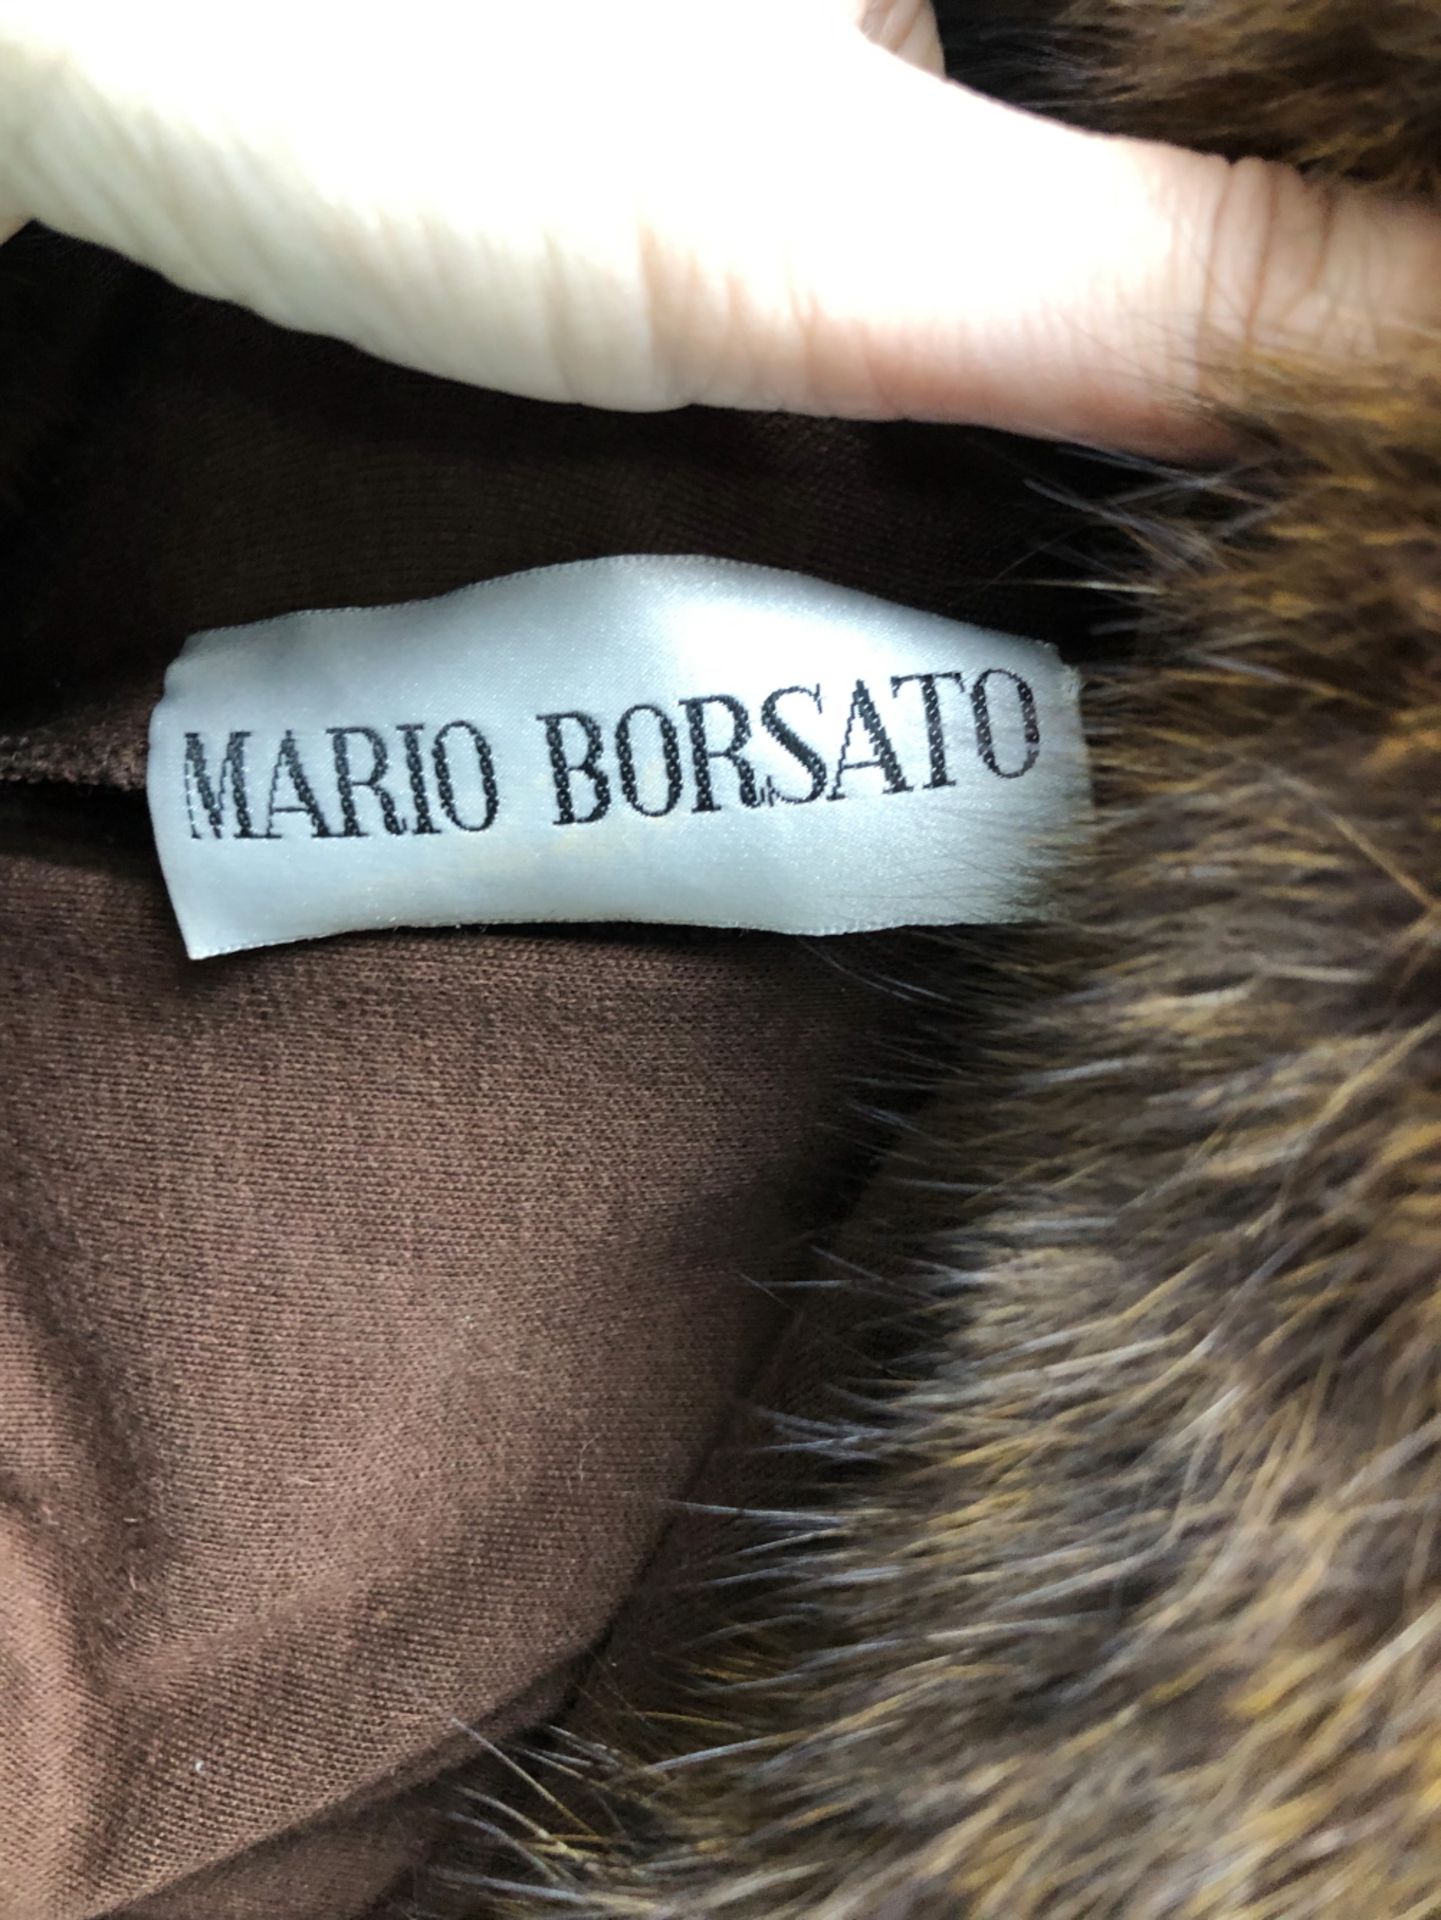 A MARIO BORSATO LONG SLEEVE SIDE RUFFLE BROWN DRESS SIZE 44, WITH A FAUX FUR COLLARED PONCHO ALSO BY - Image 8 of 8